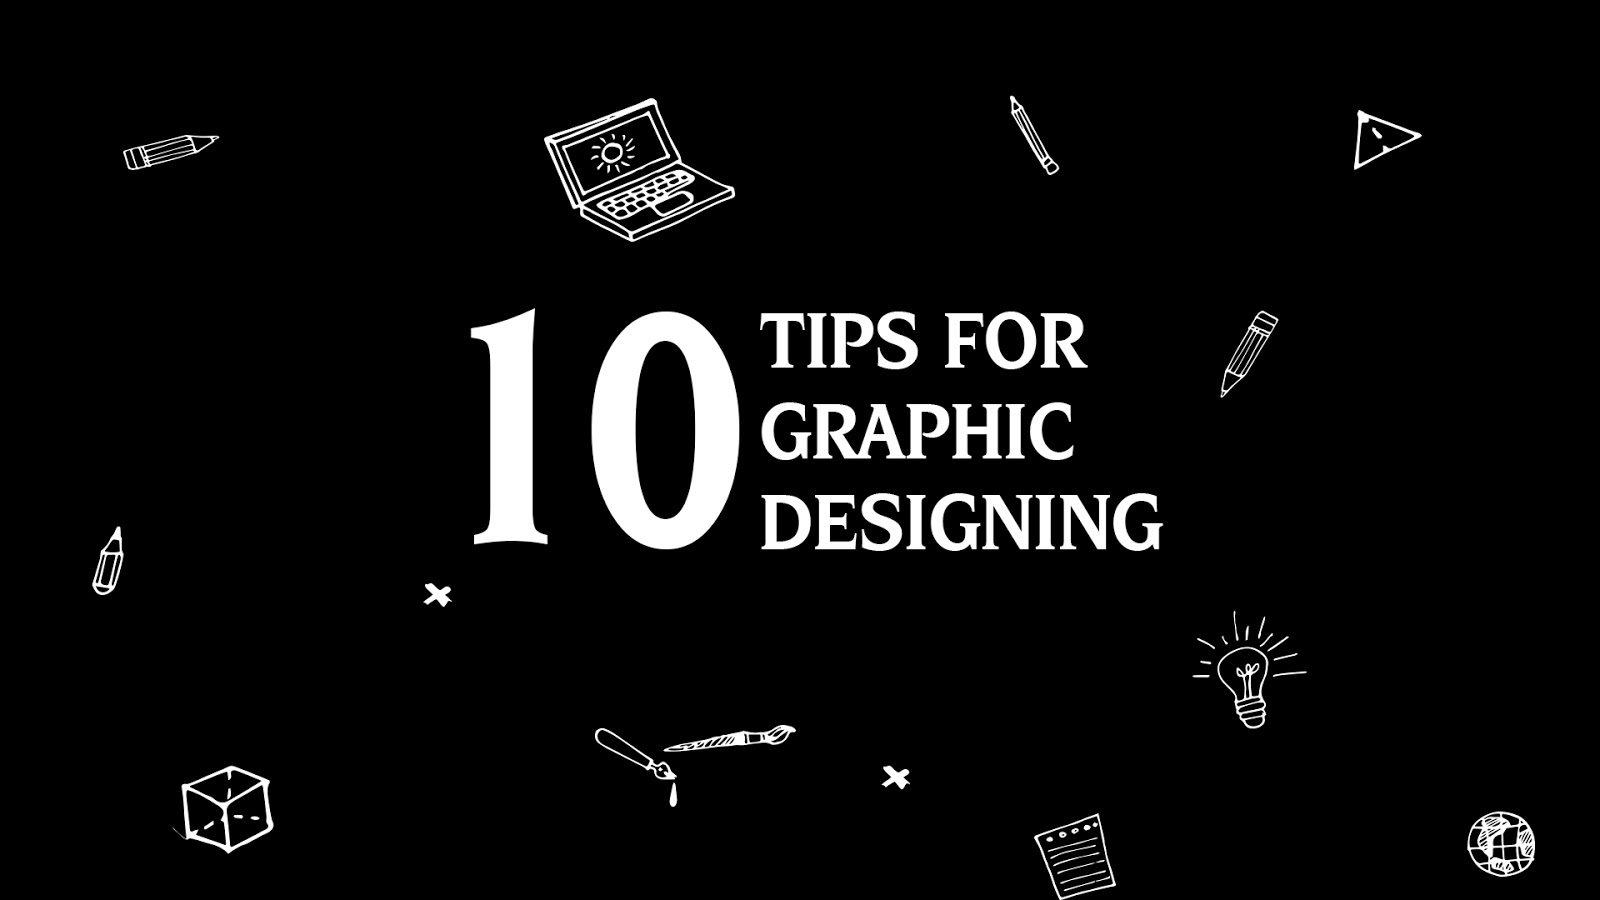 Graphic Designing Tips and Tricks